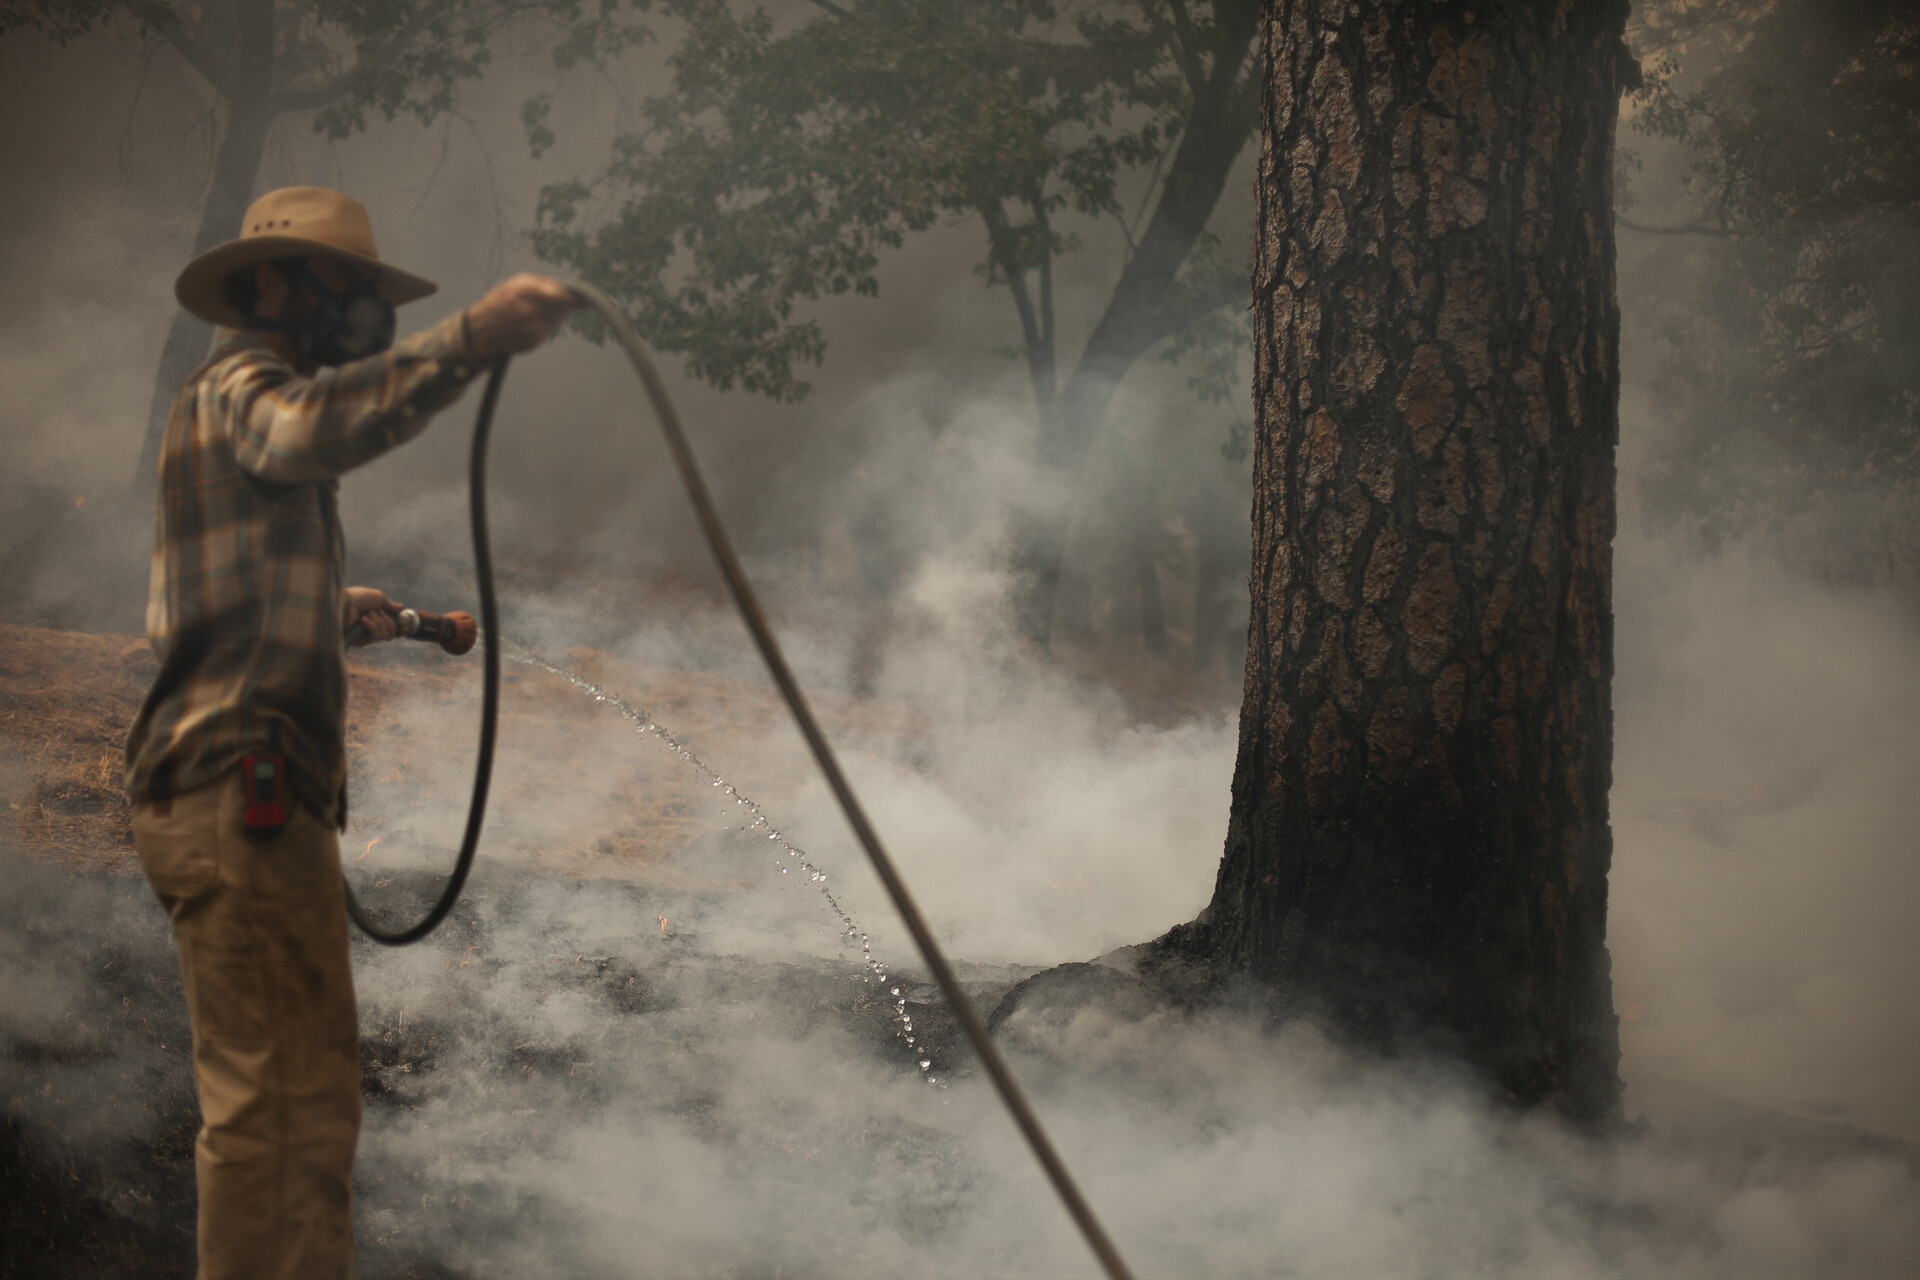 A man holds a water hose near a smoked filled forest area.